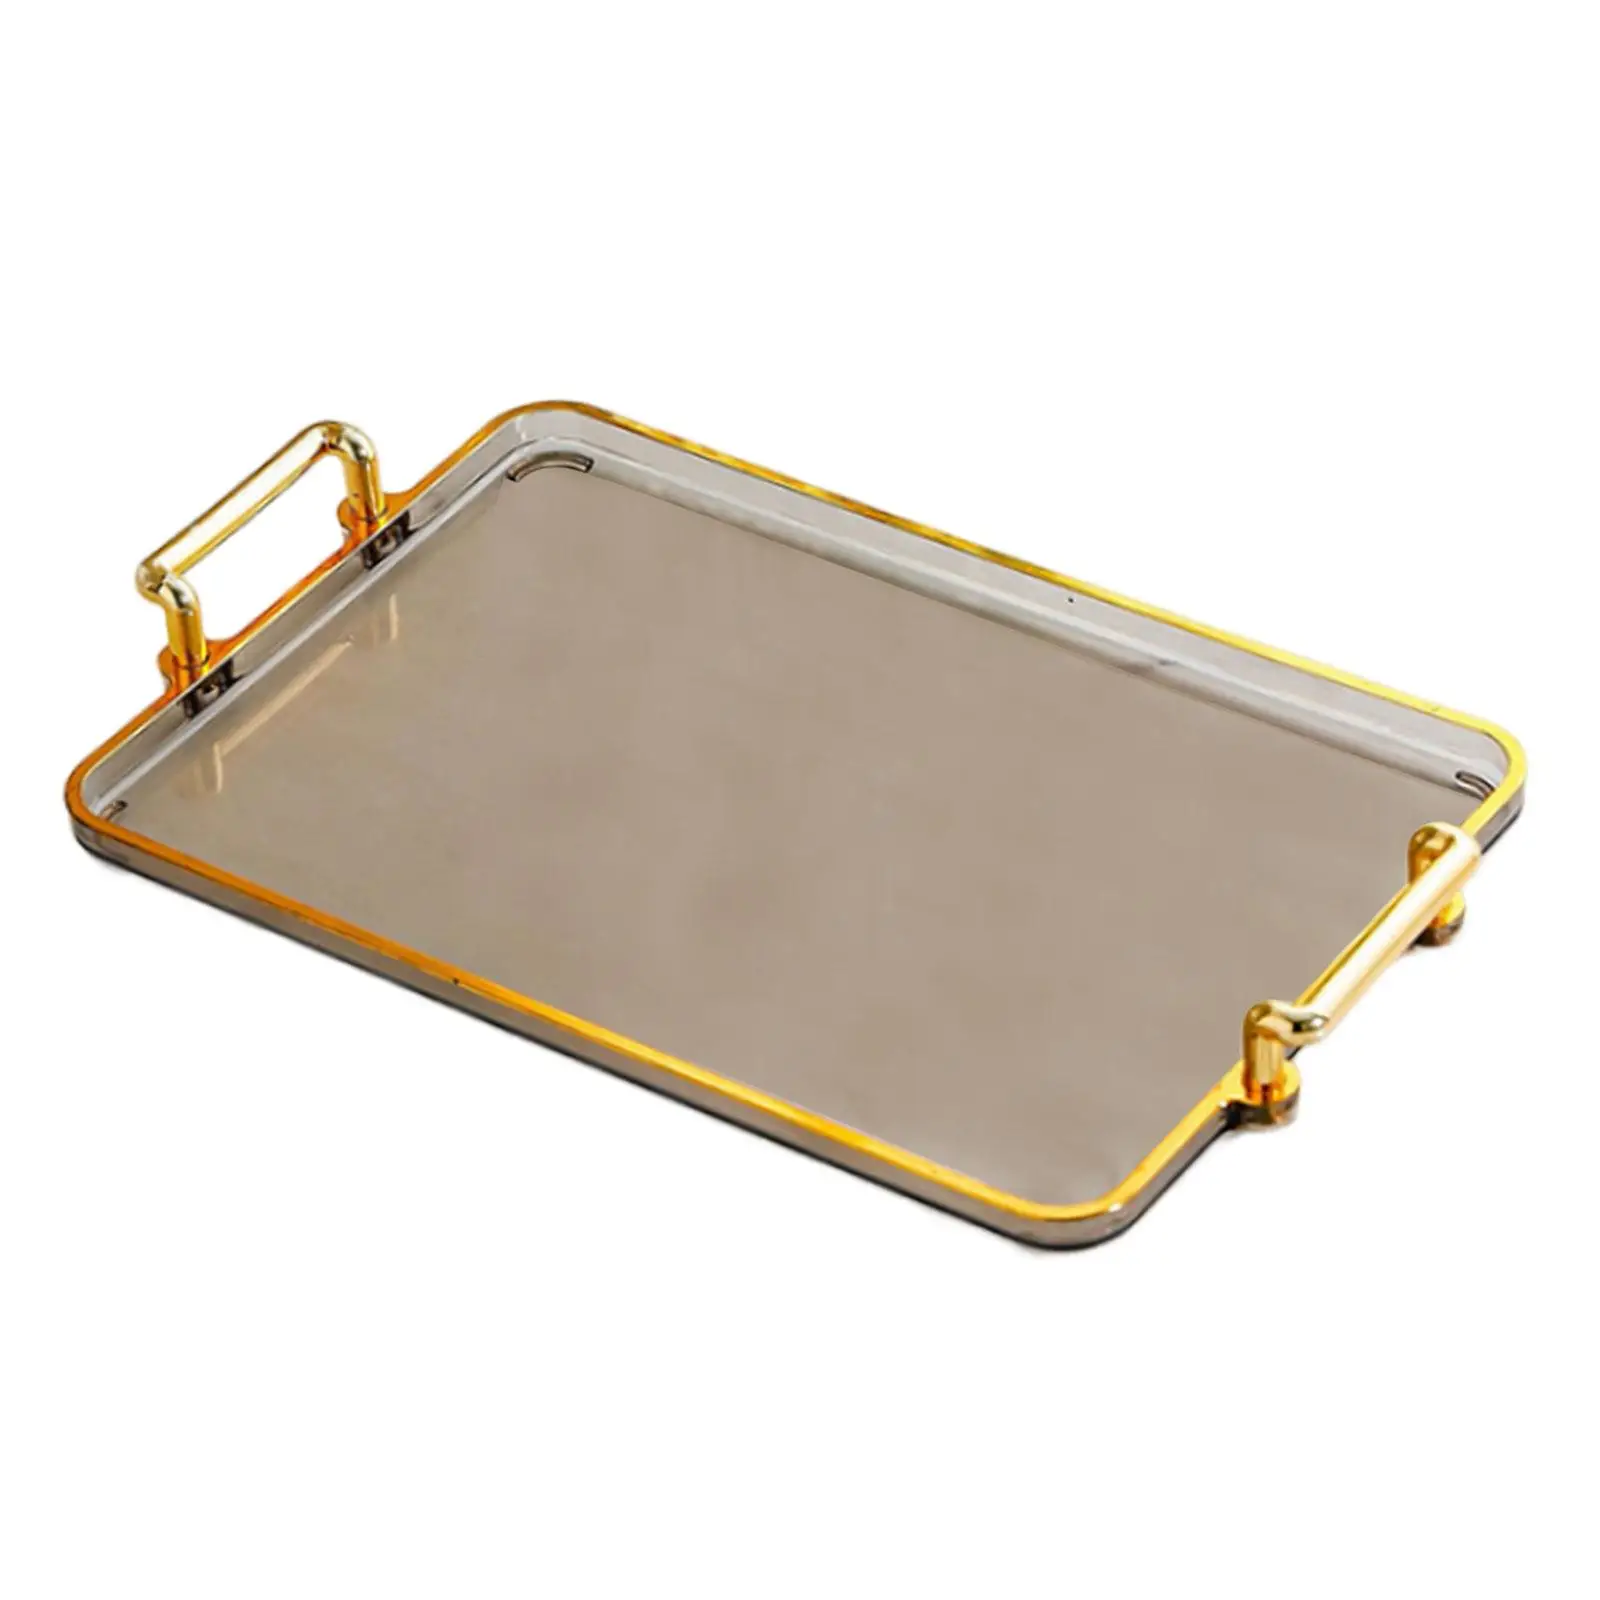 Serving Tray with Handles Eating Tray Cosmetic Storage Decorative Tray